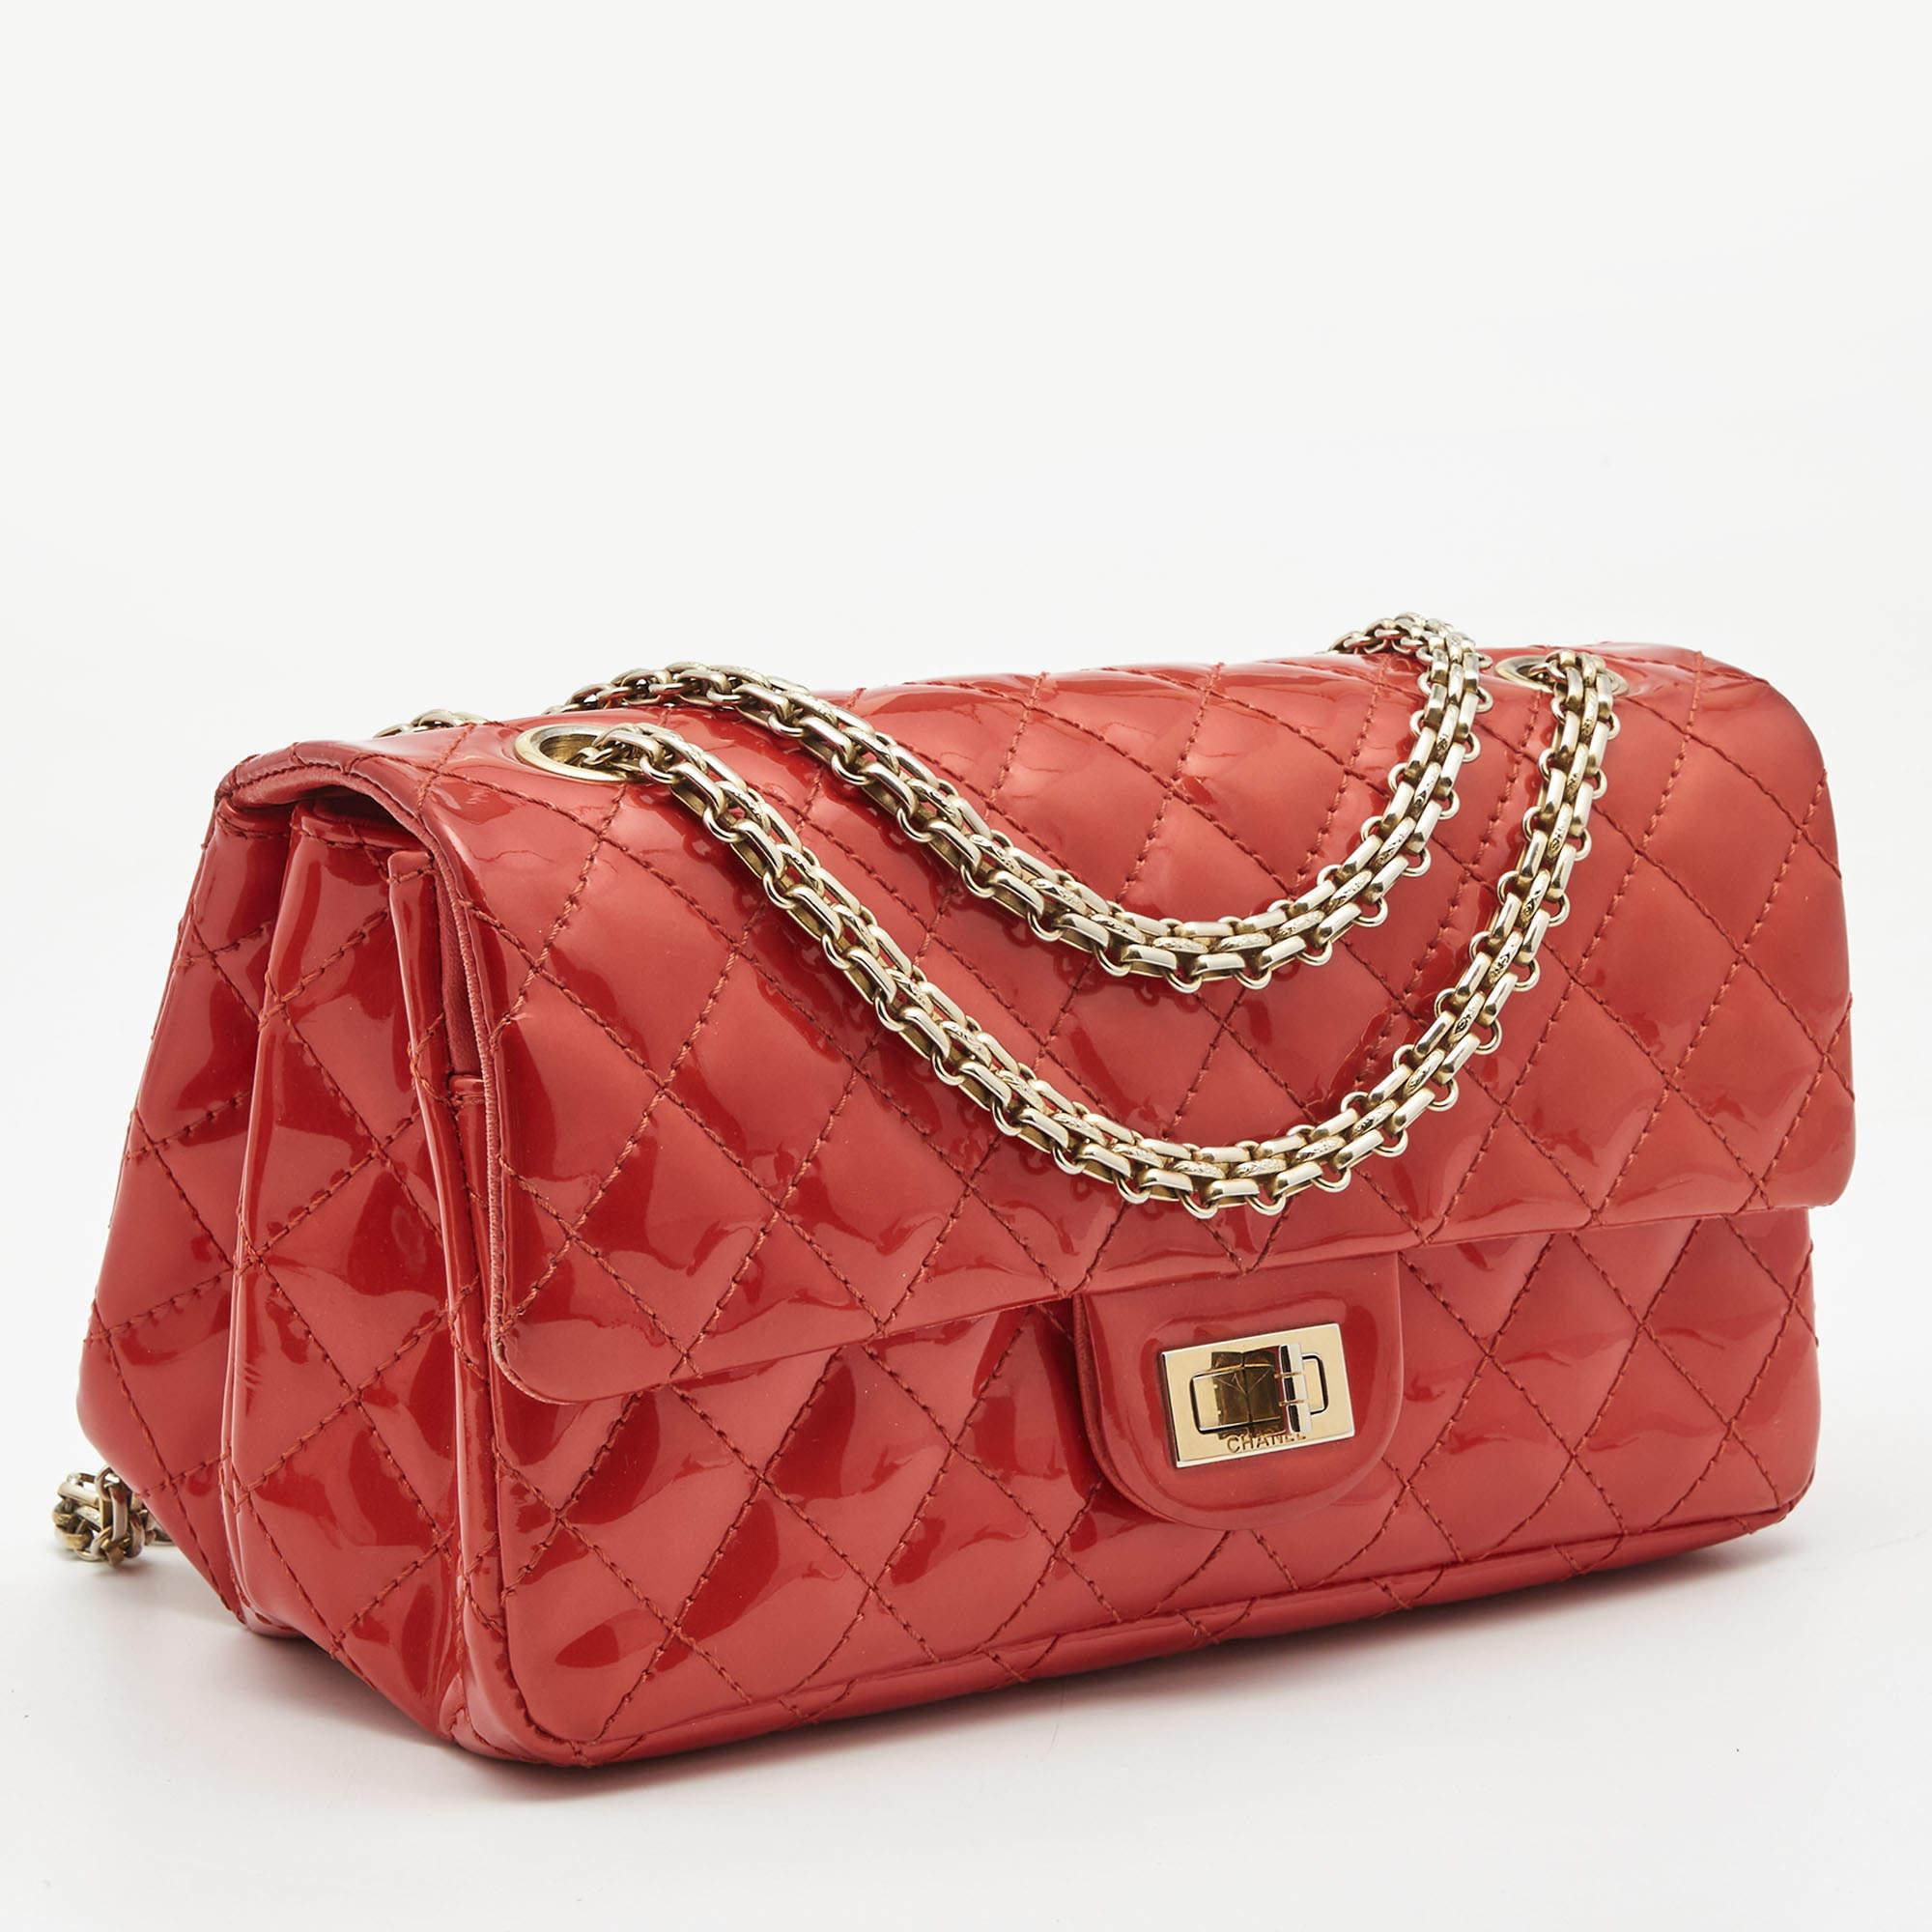 Chanel Red Patent Leather Reissue Double Compartment Flap Bag In Good Condition For Sale In Dubai, Al Qouz 2